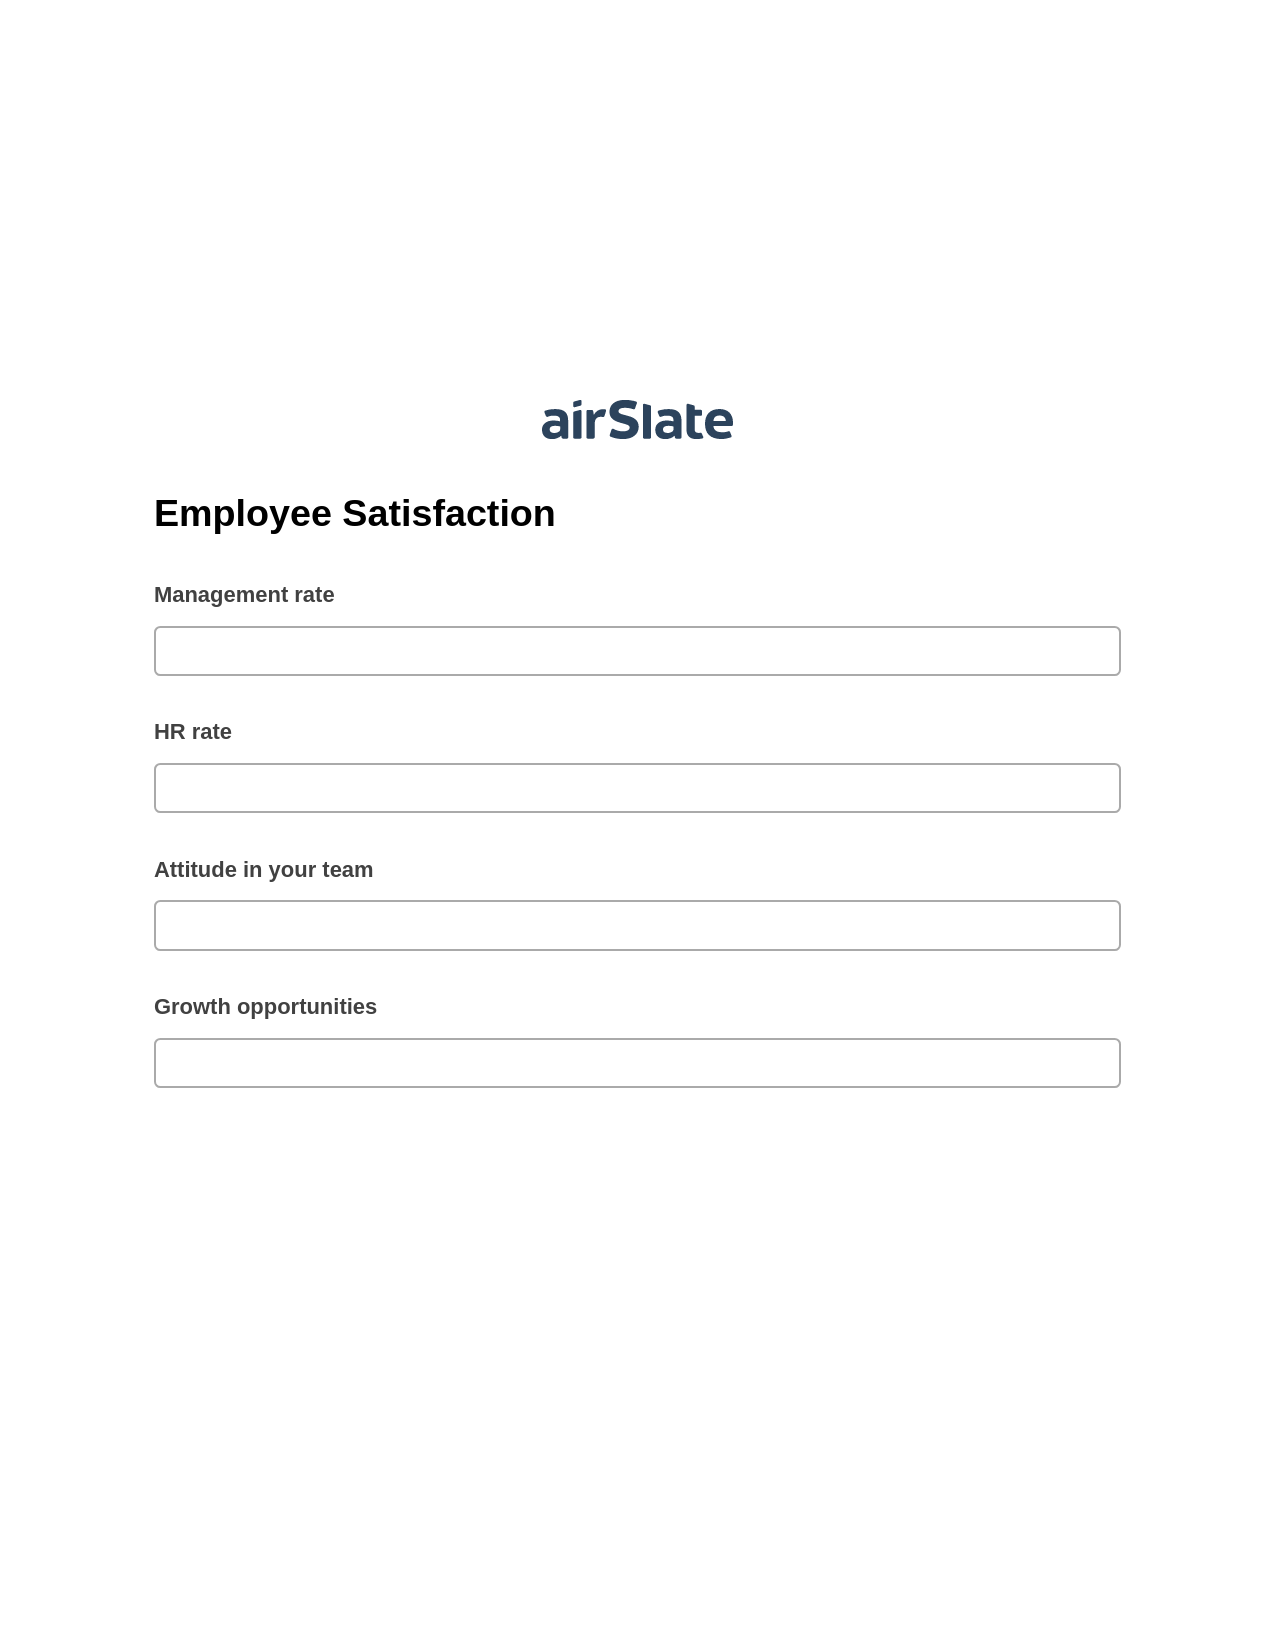 Employee Satisfaction Pre-fill from Excel Spreadsheet Bot, Send a Slate to MS Dynamics 365 Contact Bot, Export to Smartsheet